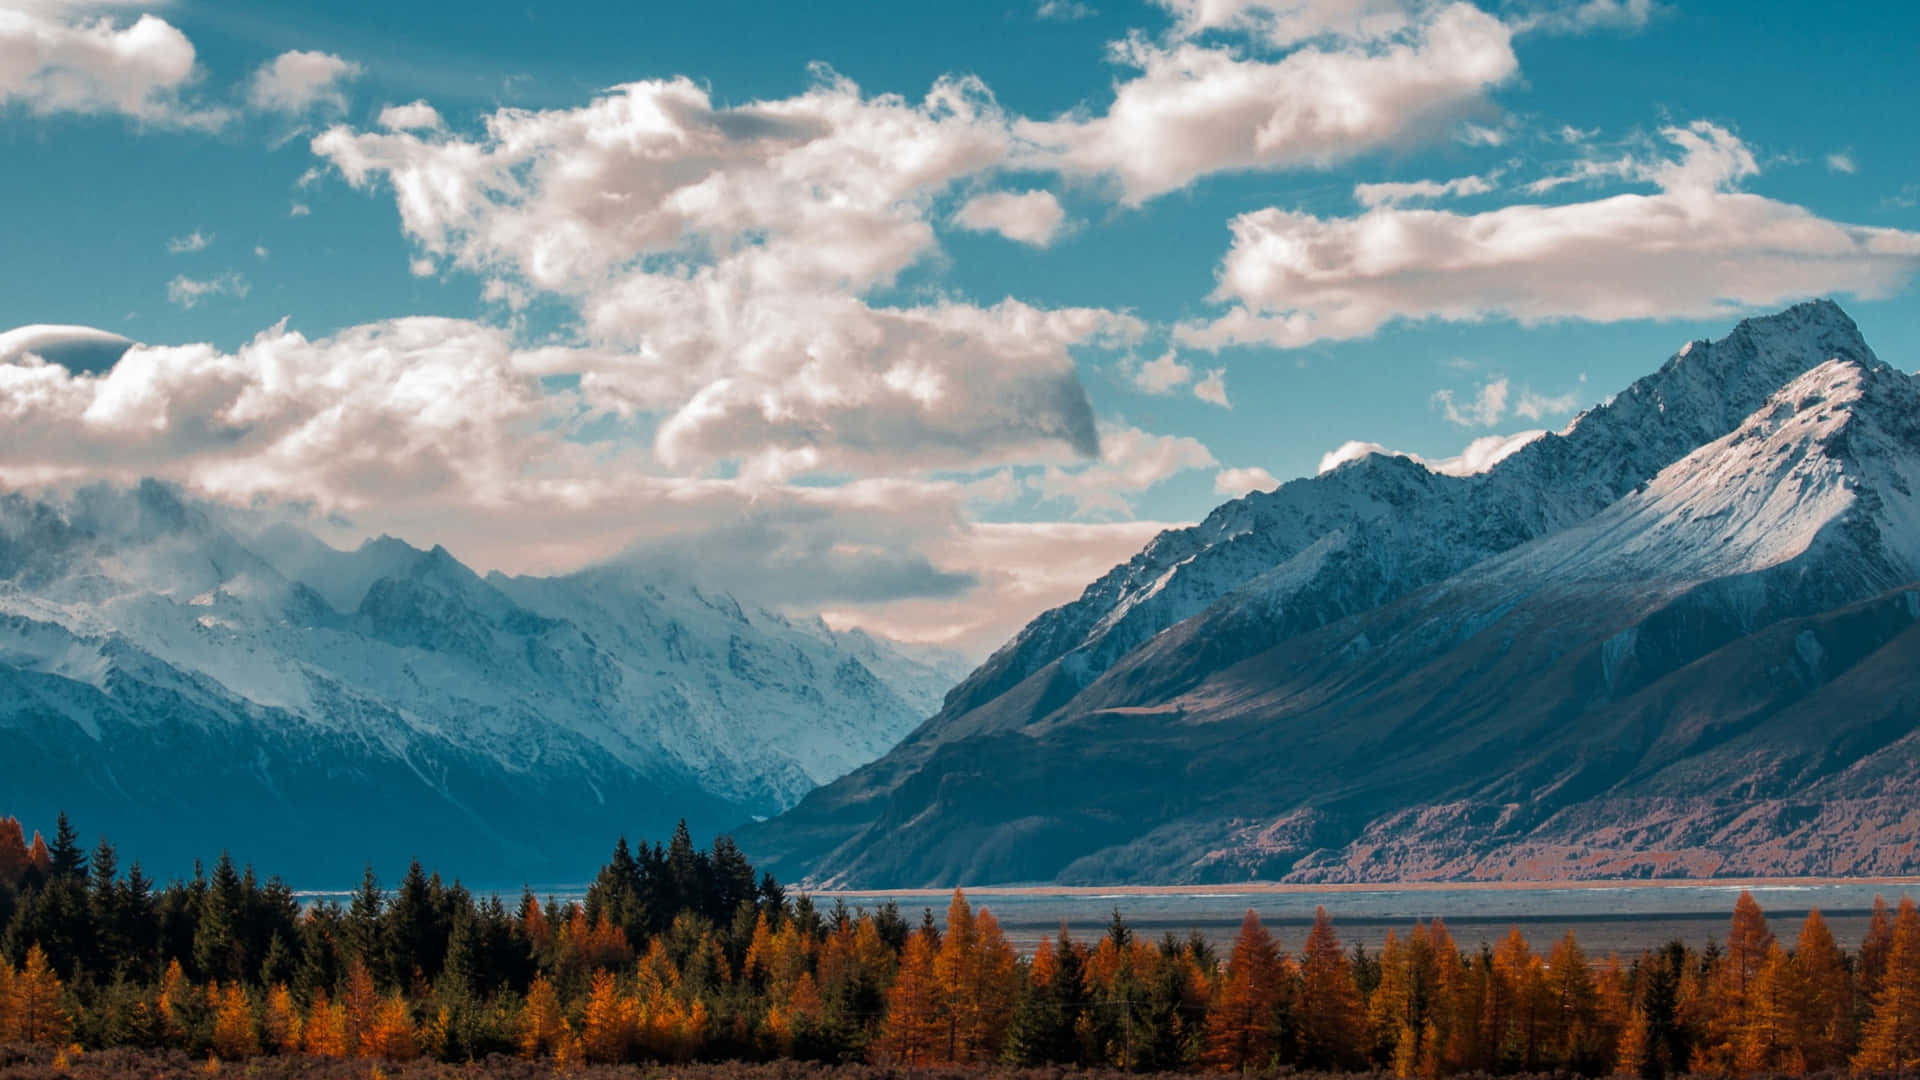 A tranquil view of the majestic mountains. Wallpaper